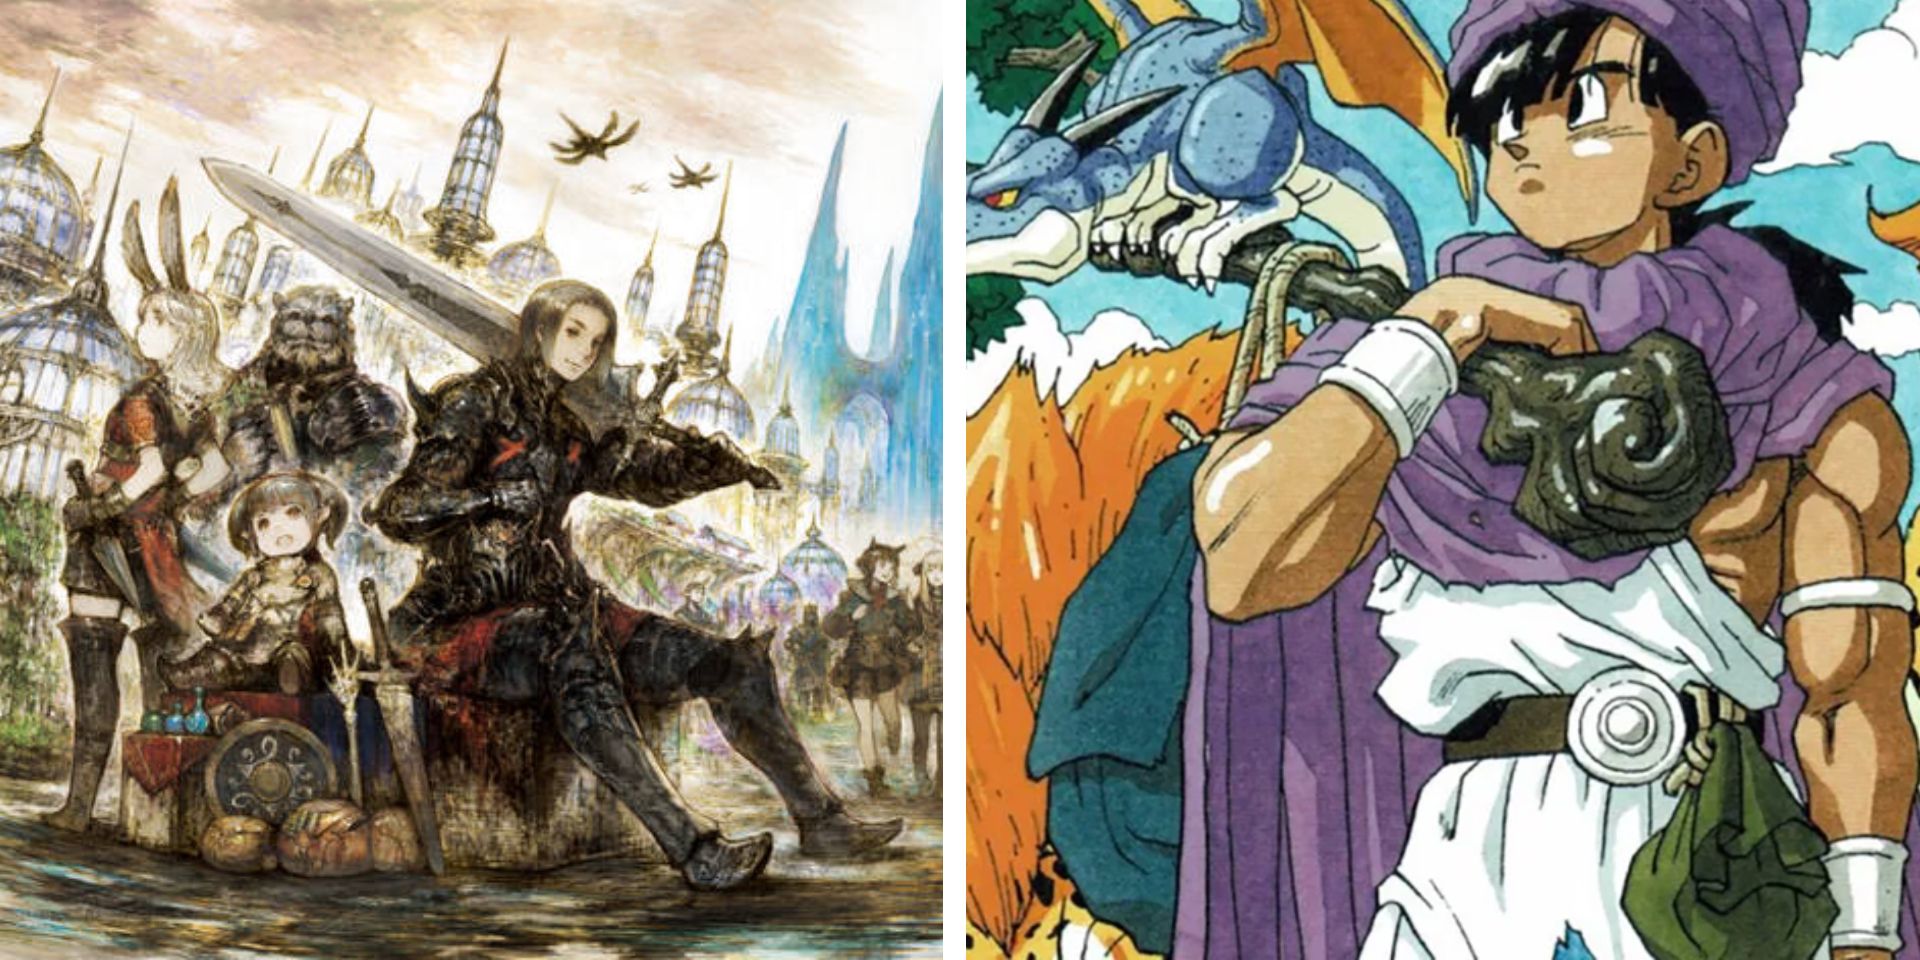 Wizardry inspired classic RPGs like Final Fantasy and Dragon Quest.